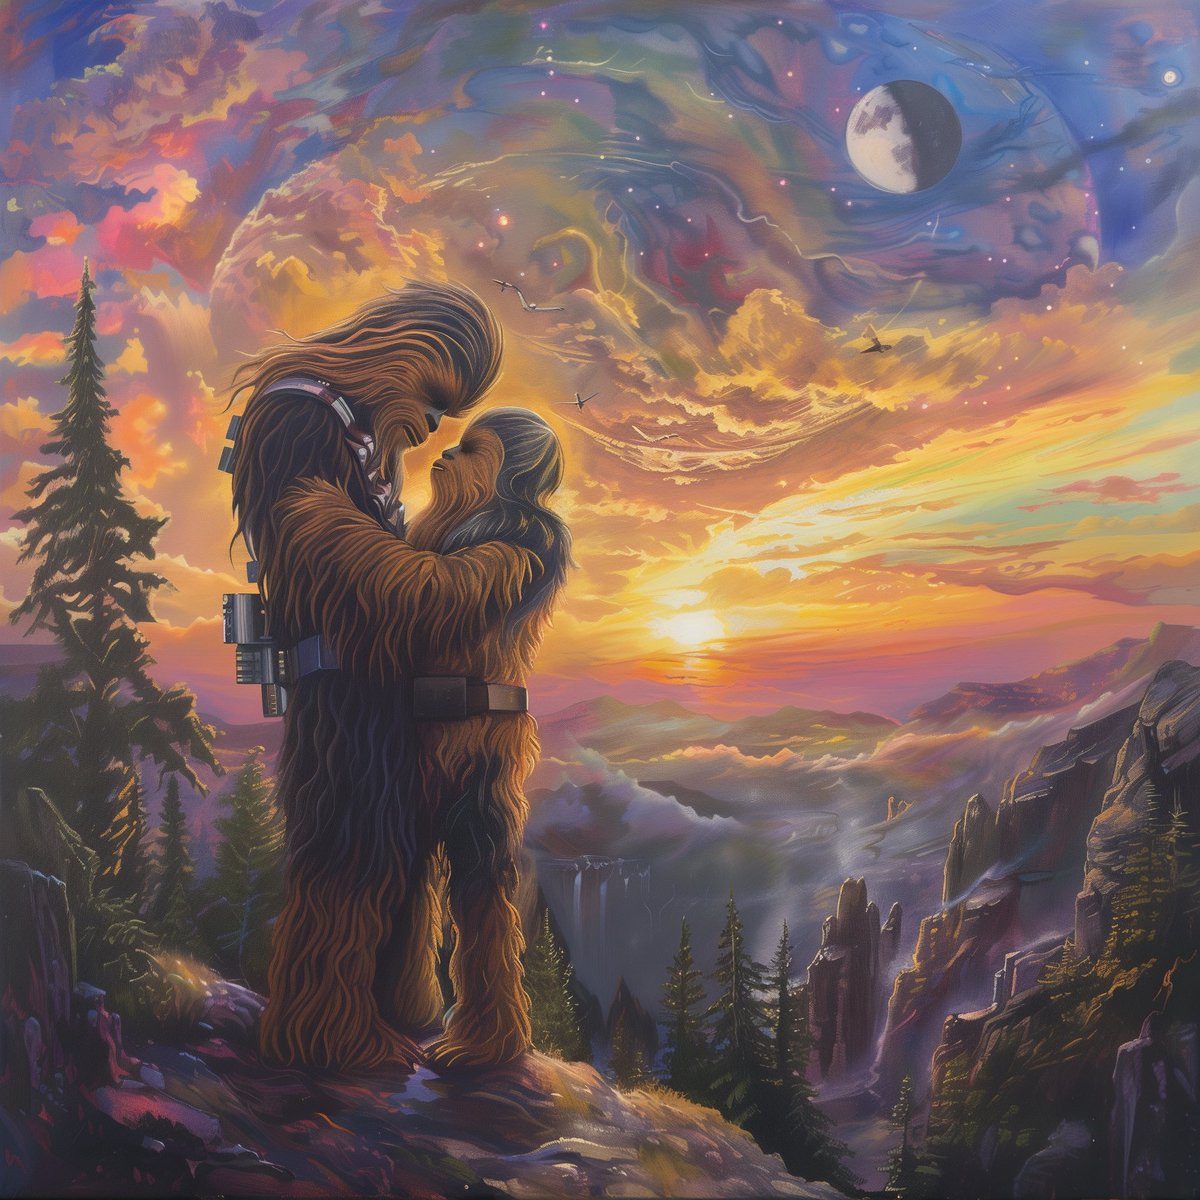 Wookie love ❤️ 
#May4thBeWithYou